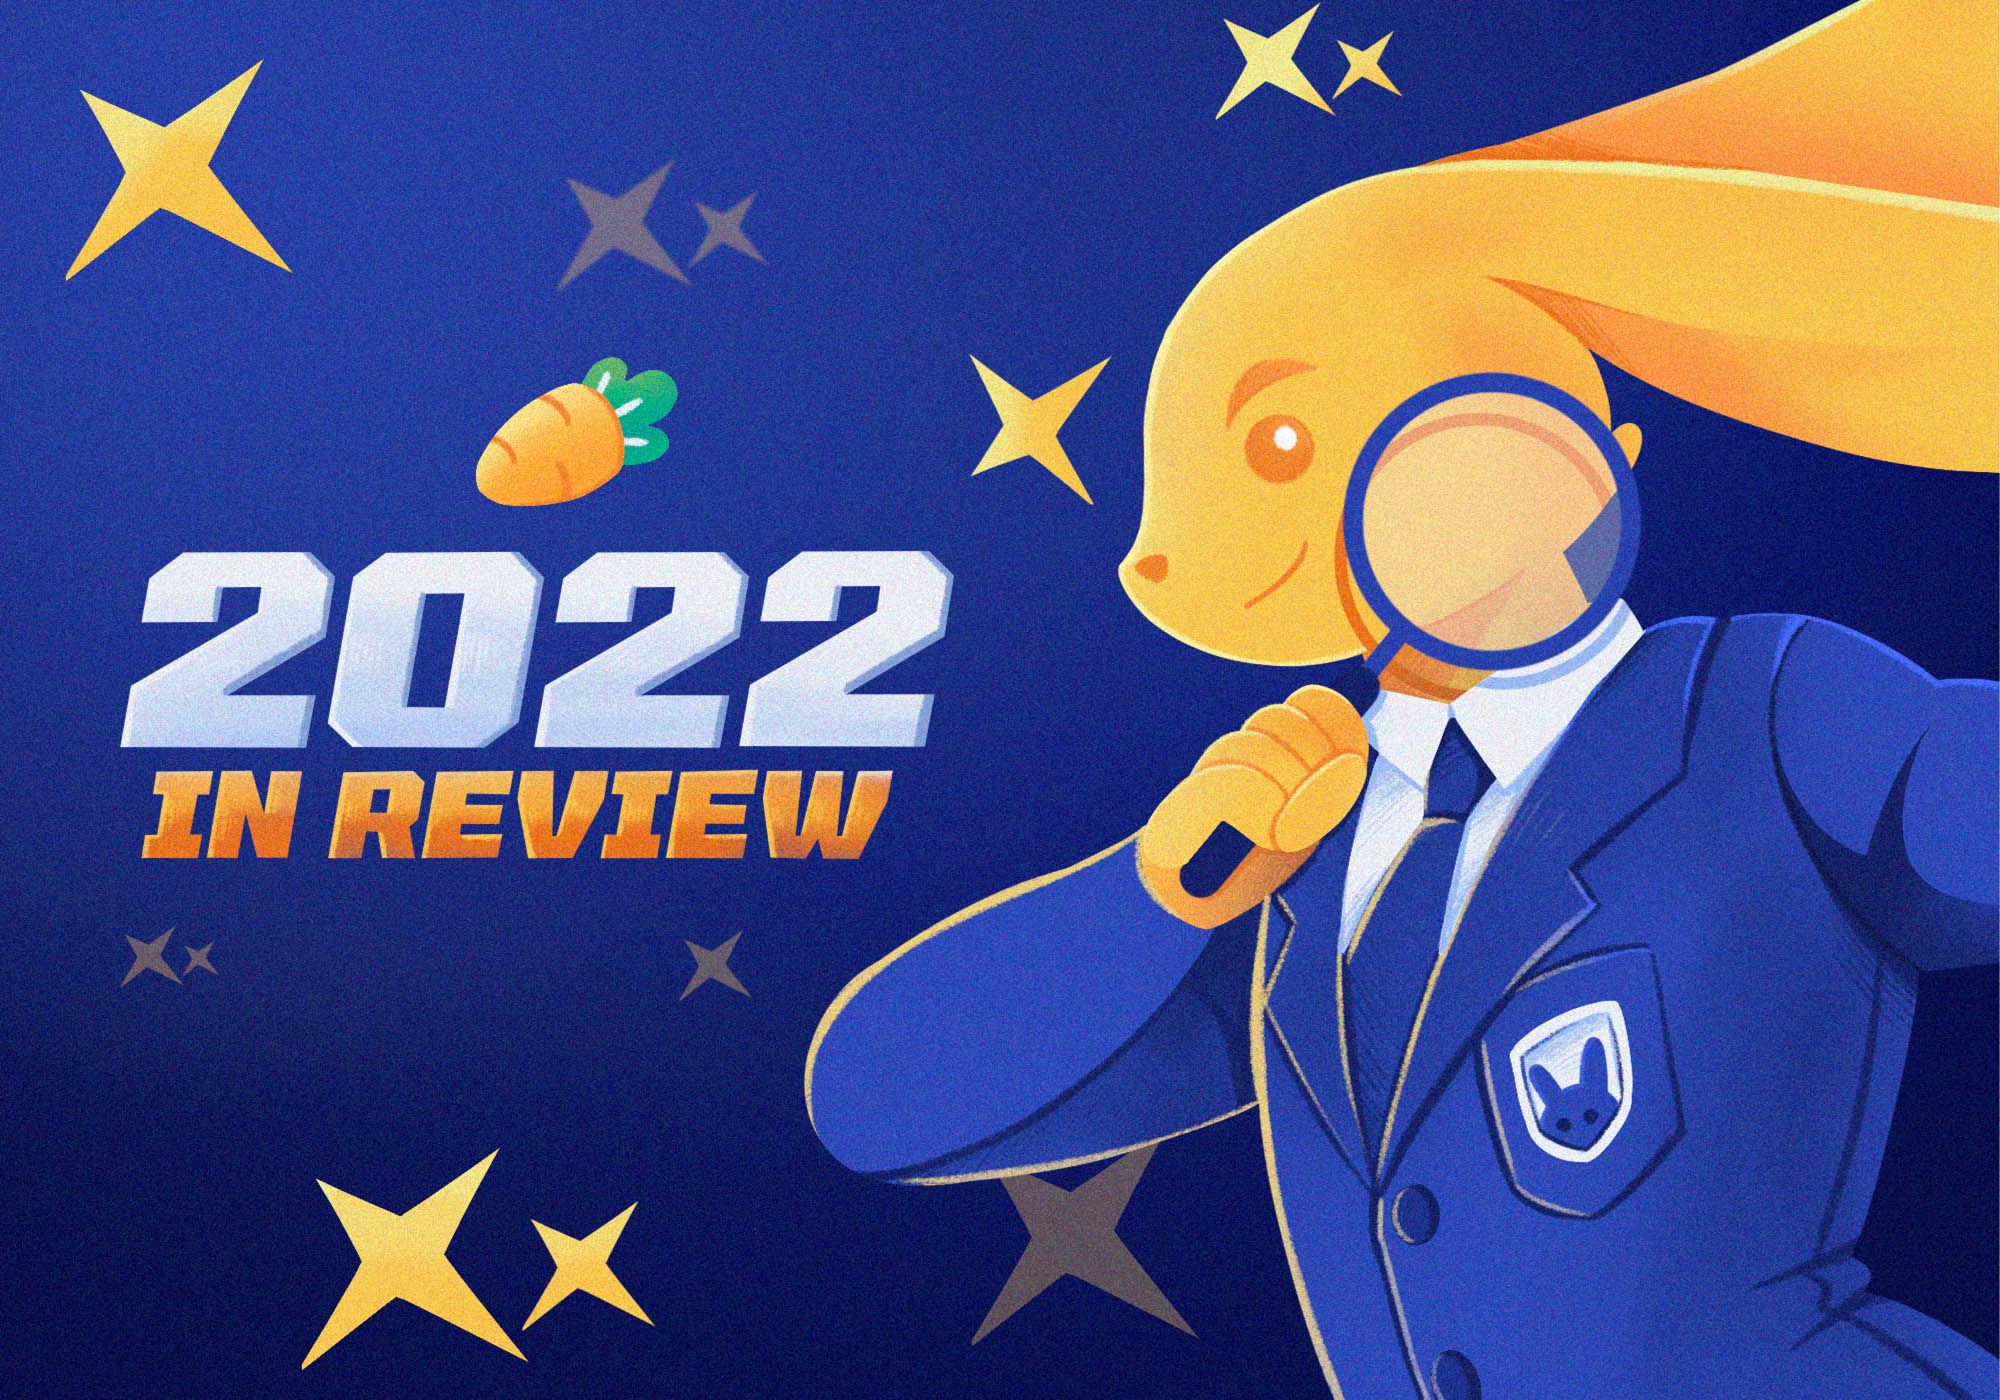 2022 In Review - Reflecting on last year's highlights